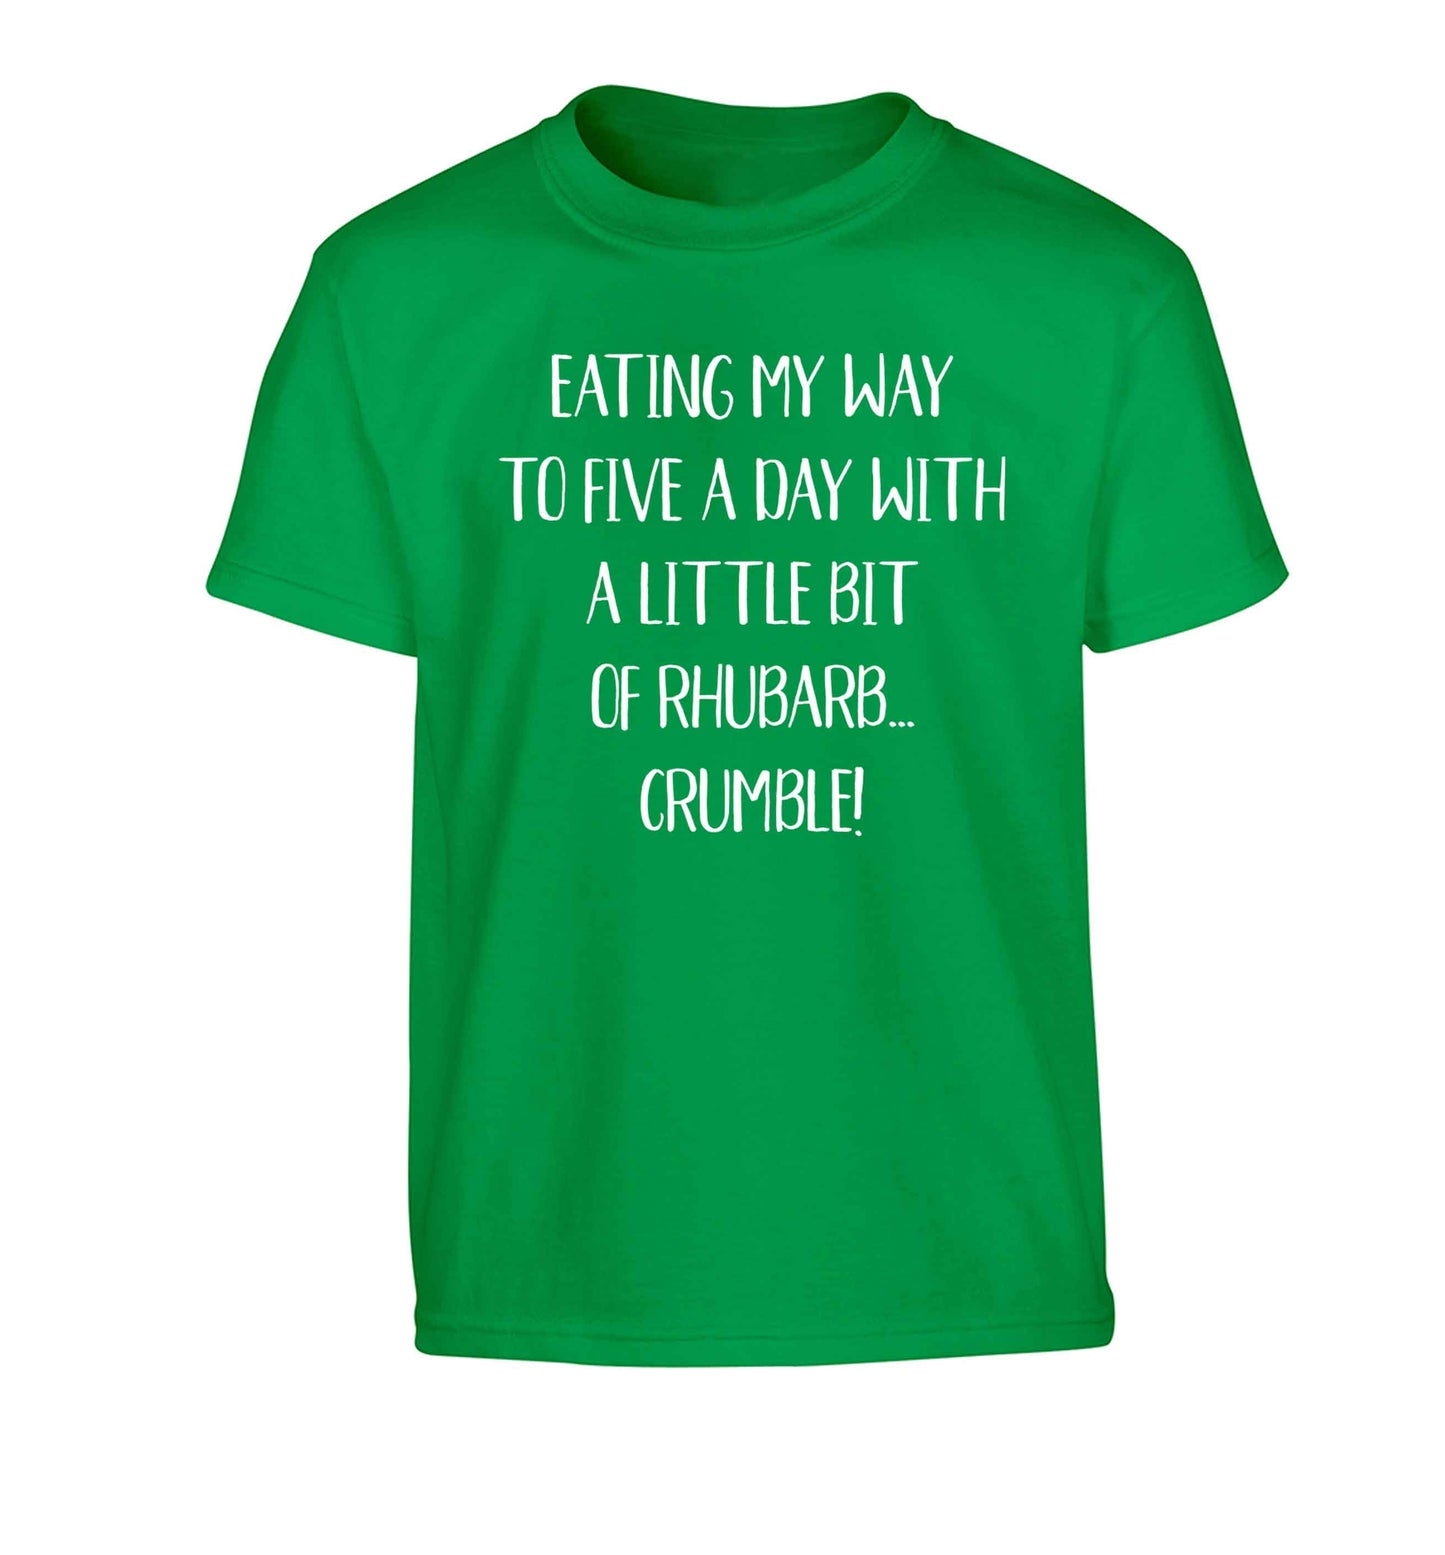 Eating my way to five a day with a little bit of rhubarb crumble Children's green Tshirt 12-13 Years